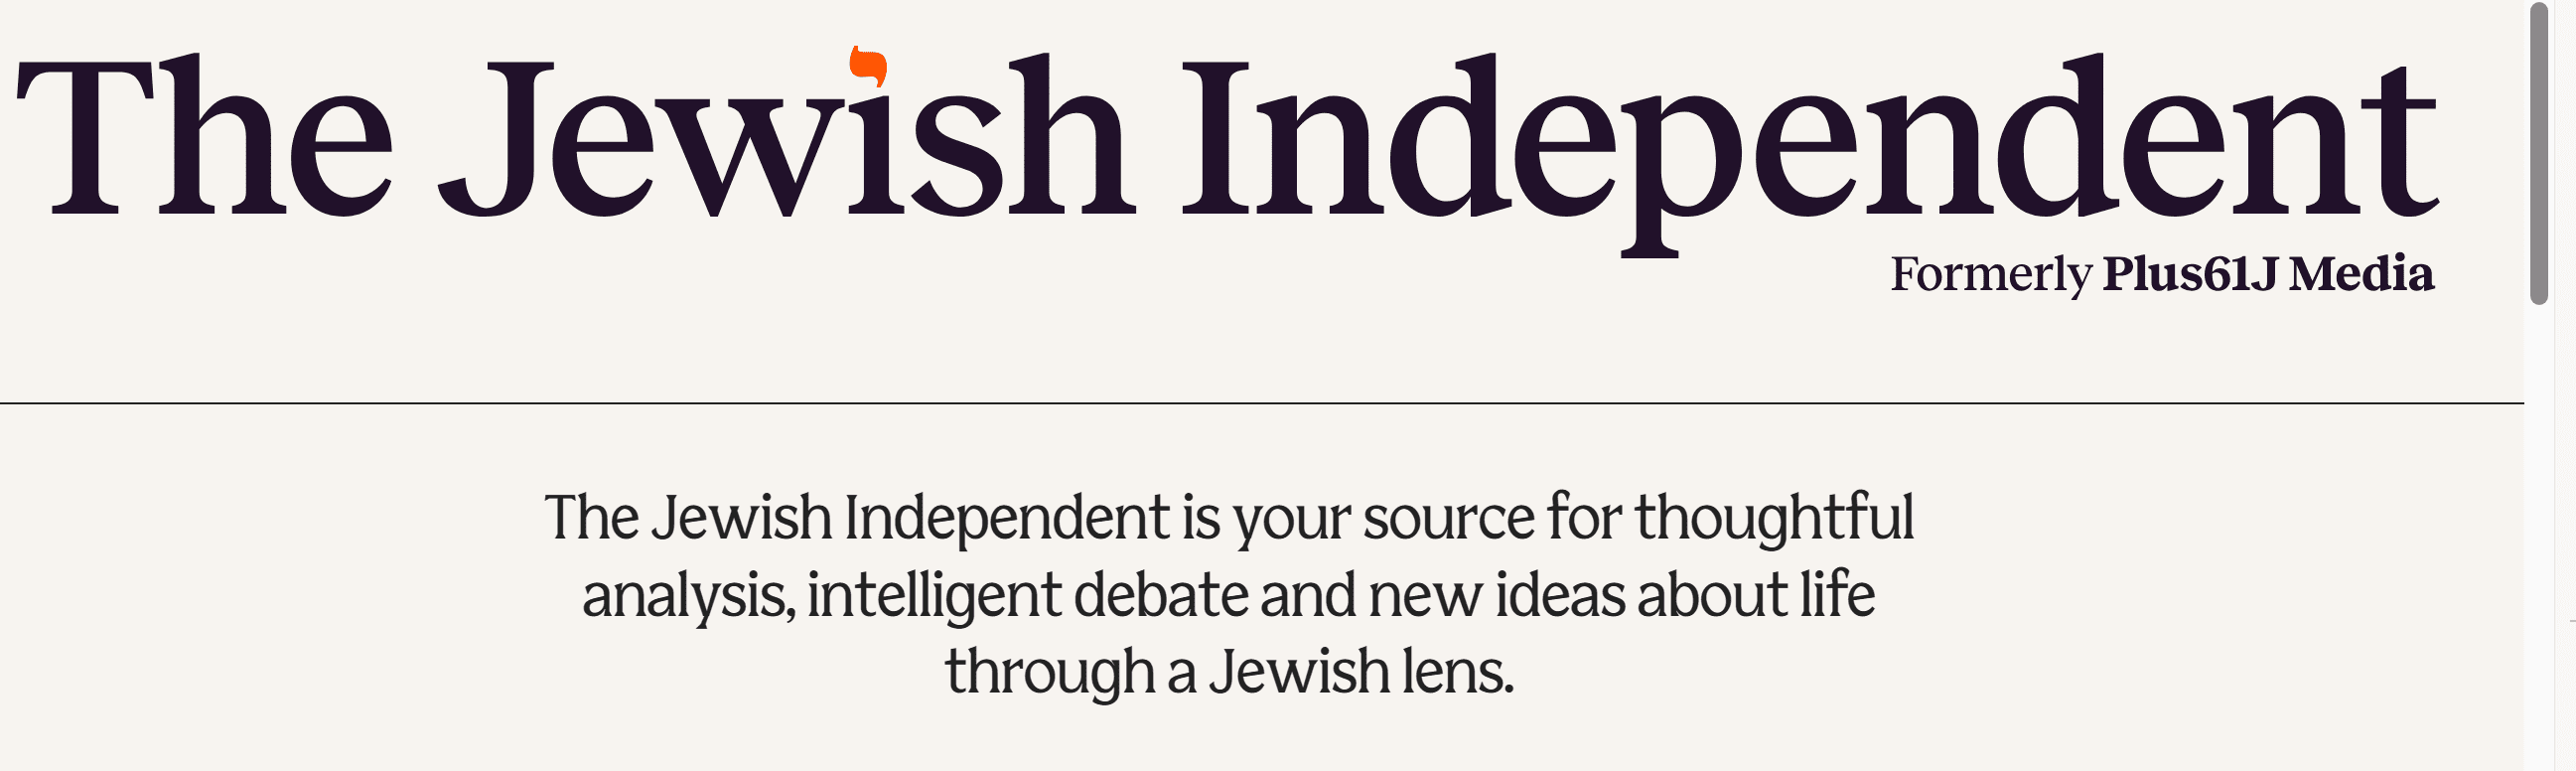 The Jewish Independent